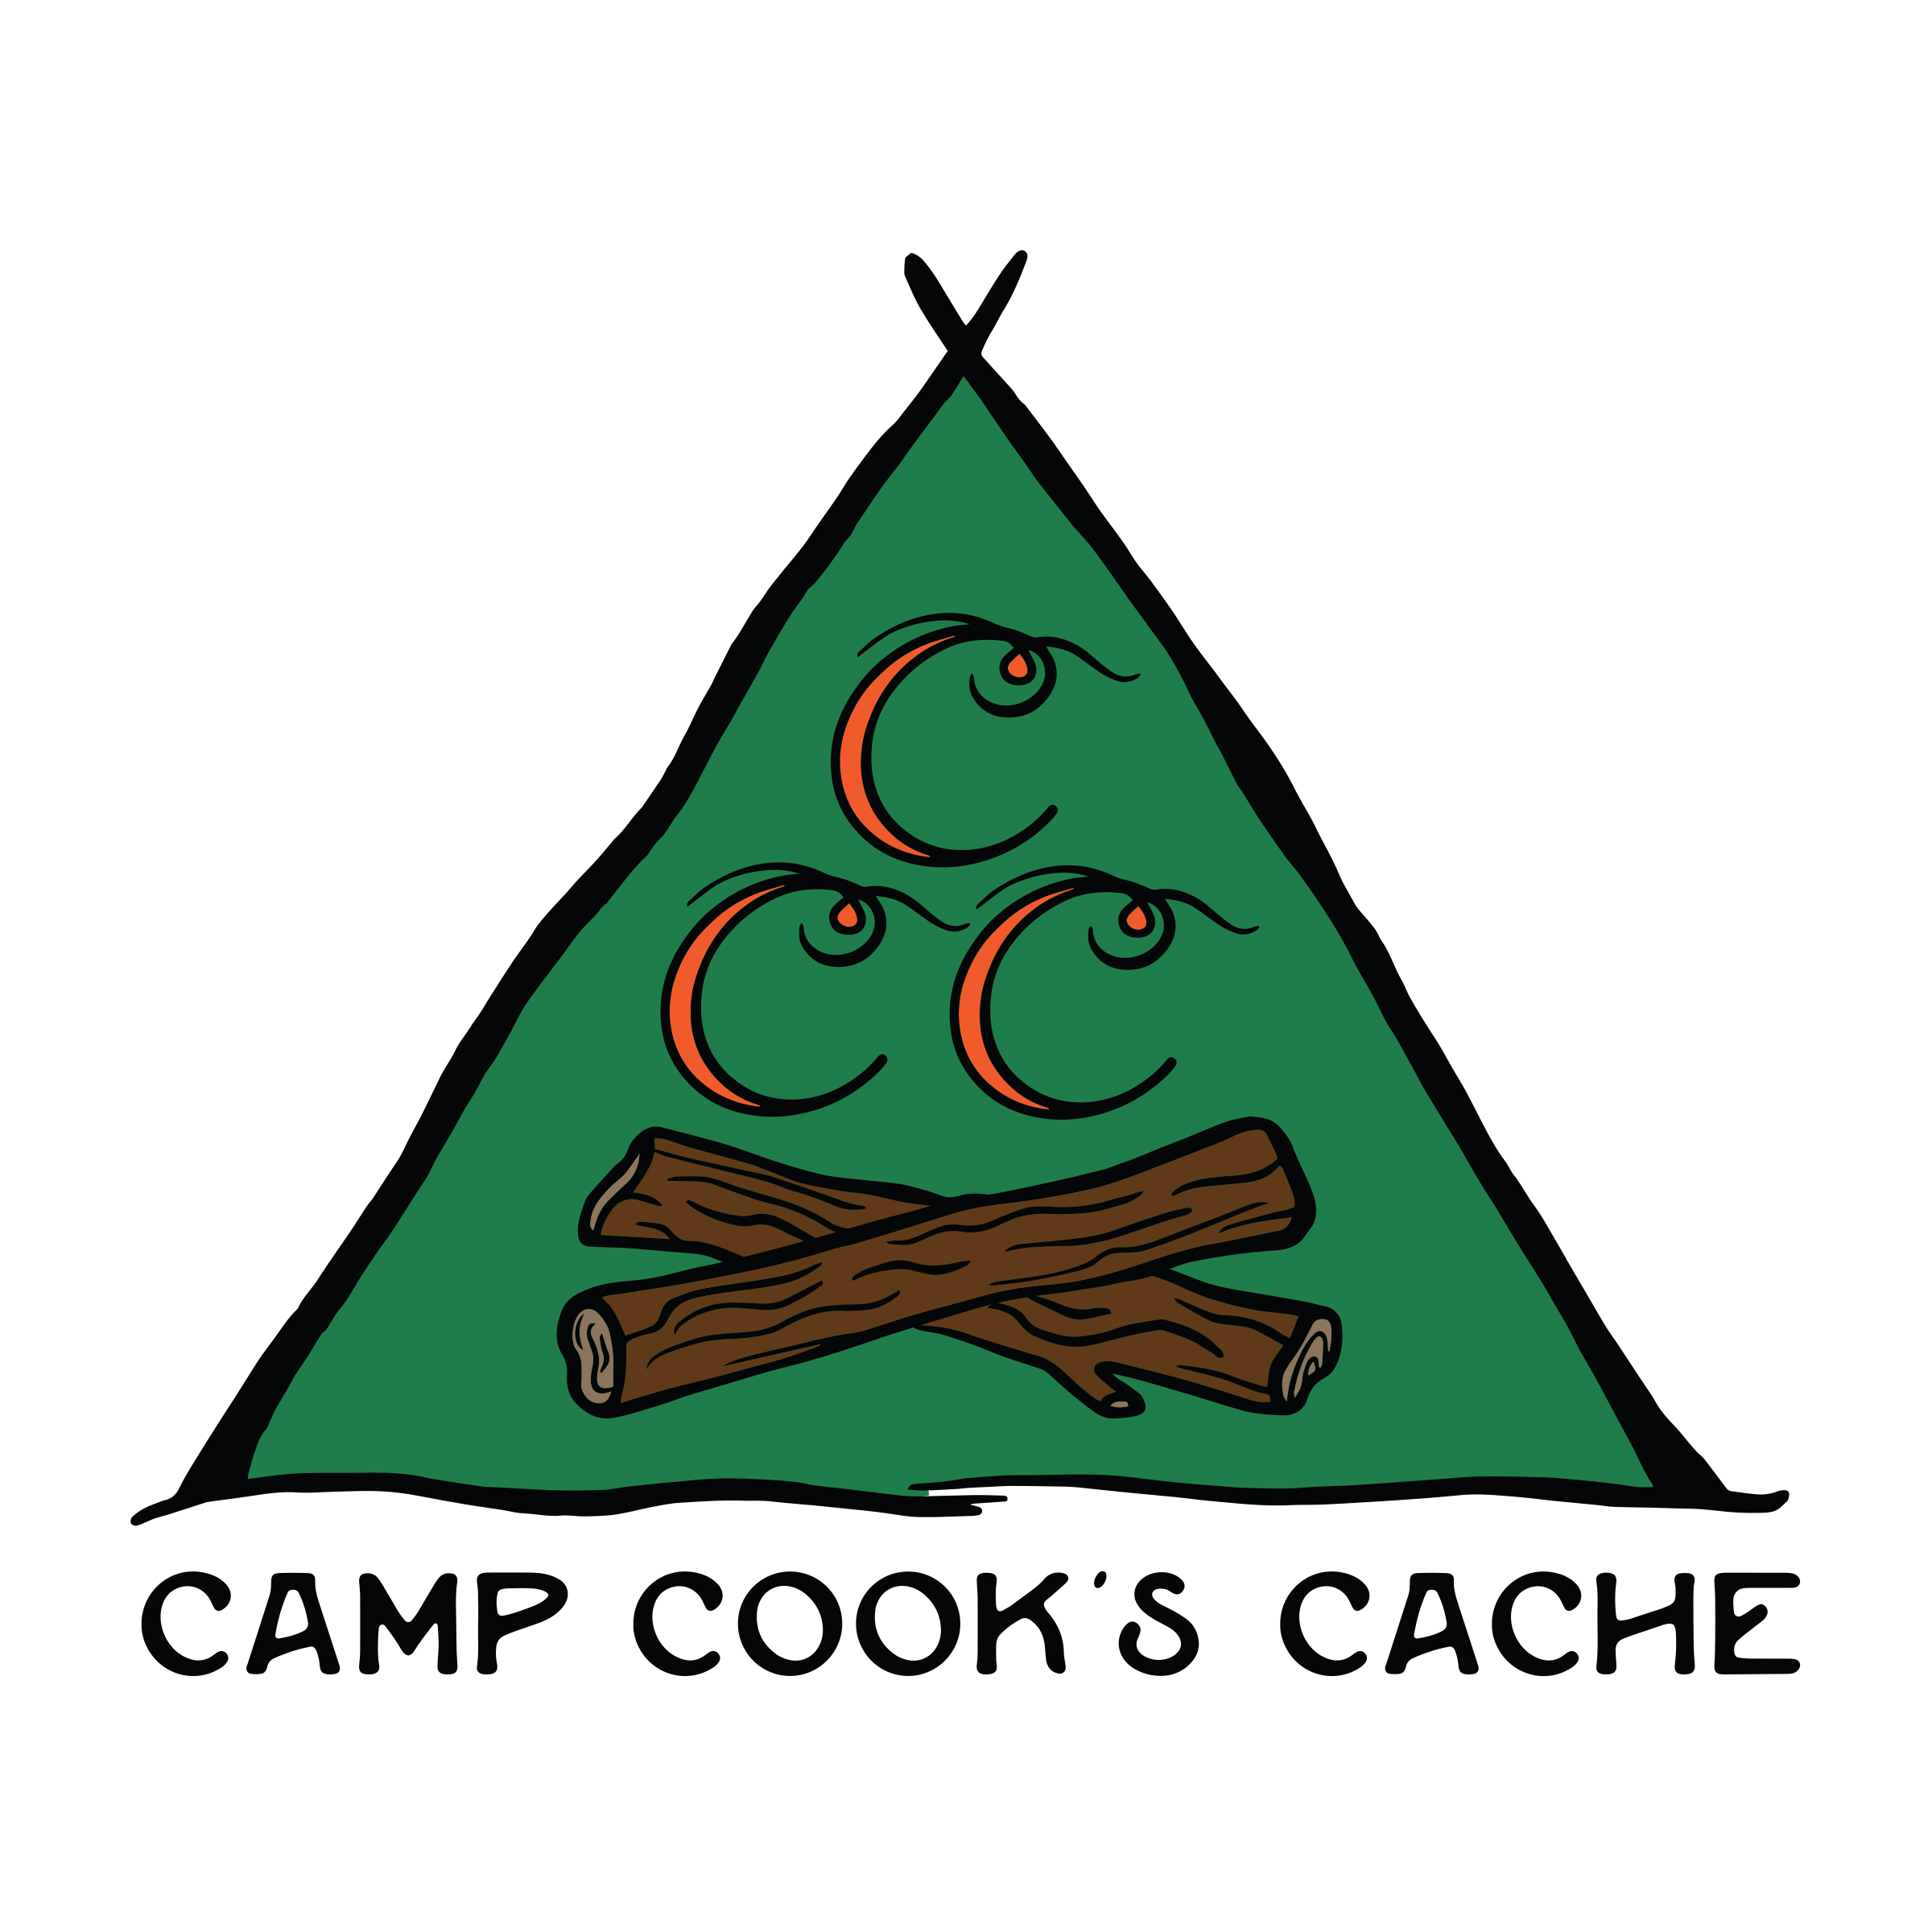 Camp Cook's Cache